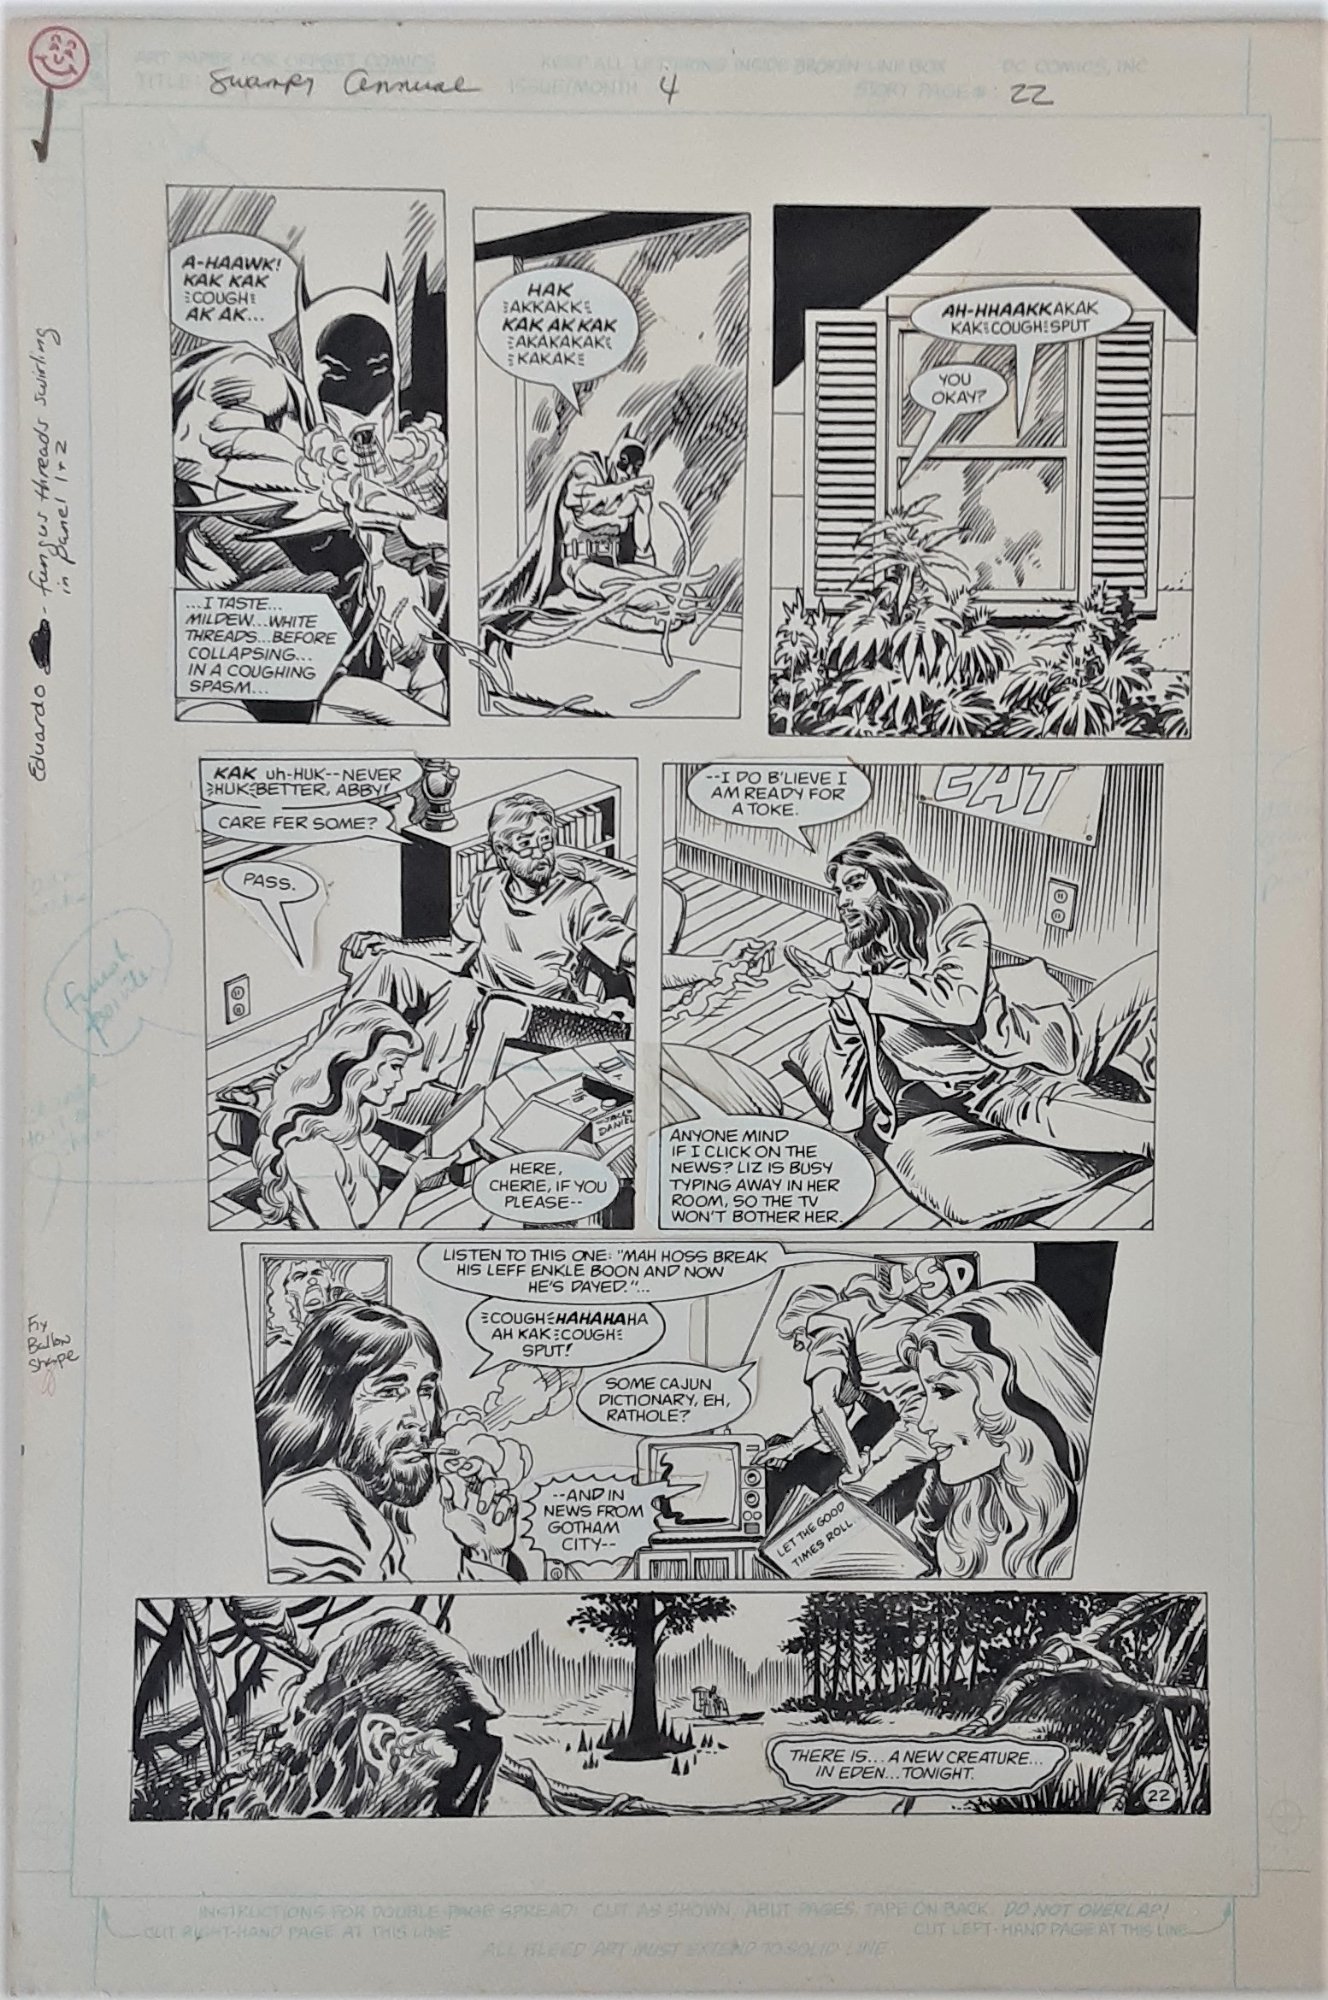 Swamp Thing Annual #4  (Batman Appearance) by Pat Broderick (1988), in  Rick W's Swamp Thing Comic Art Gallery Room